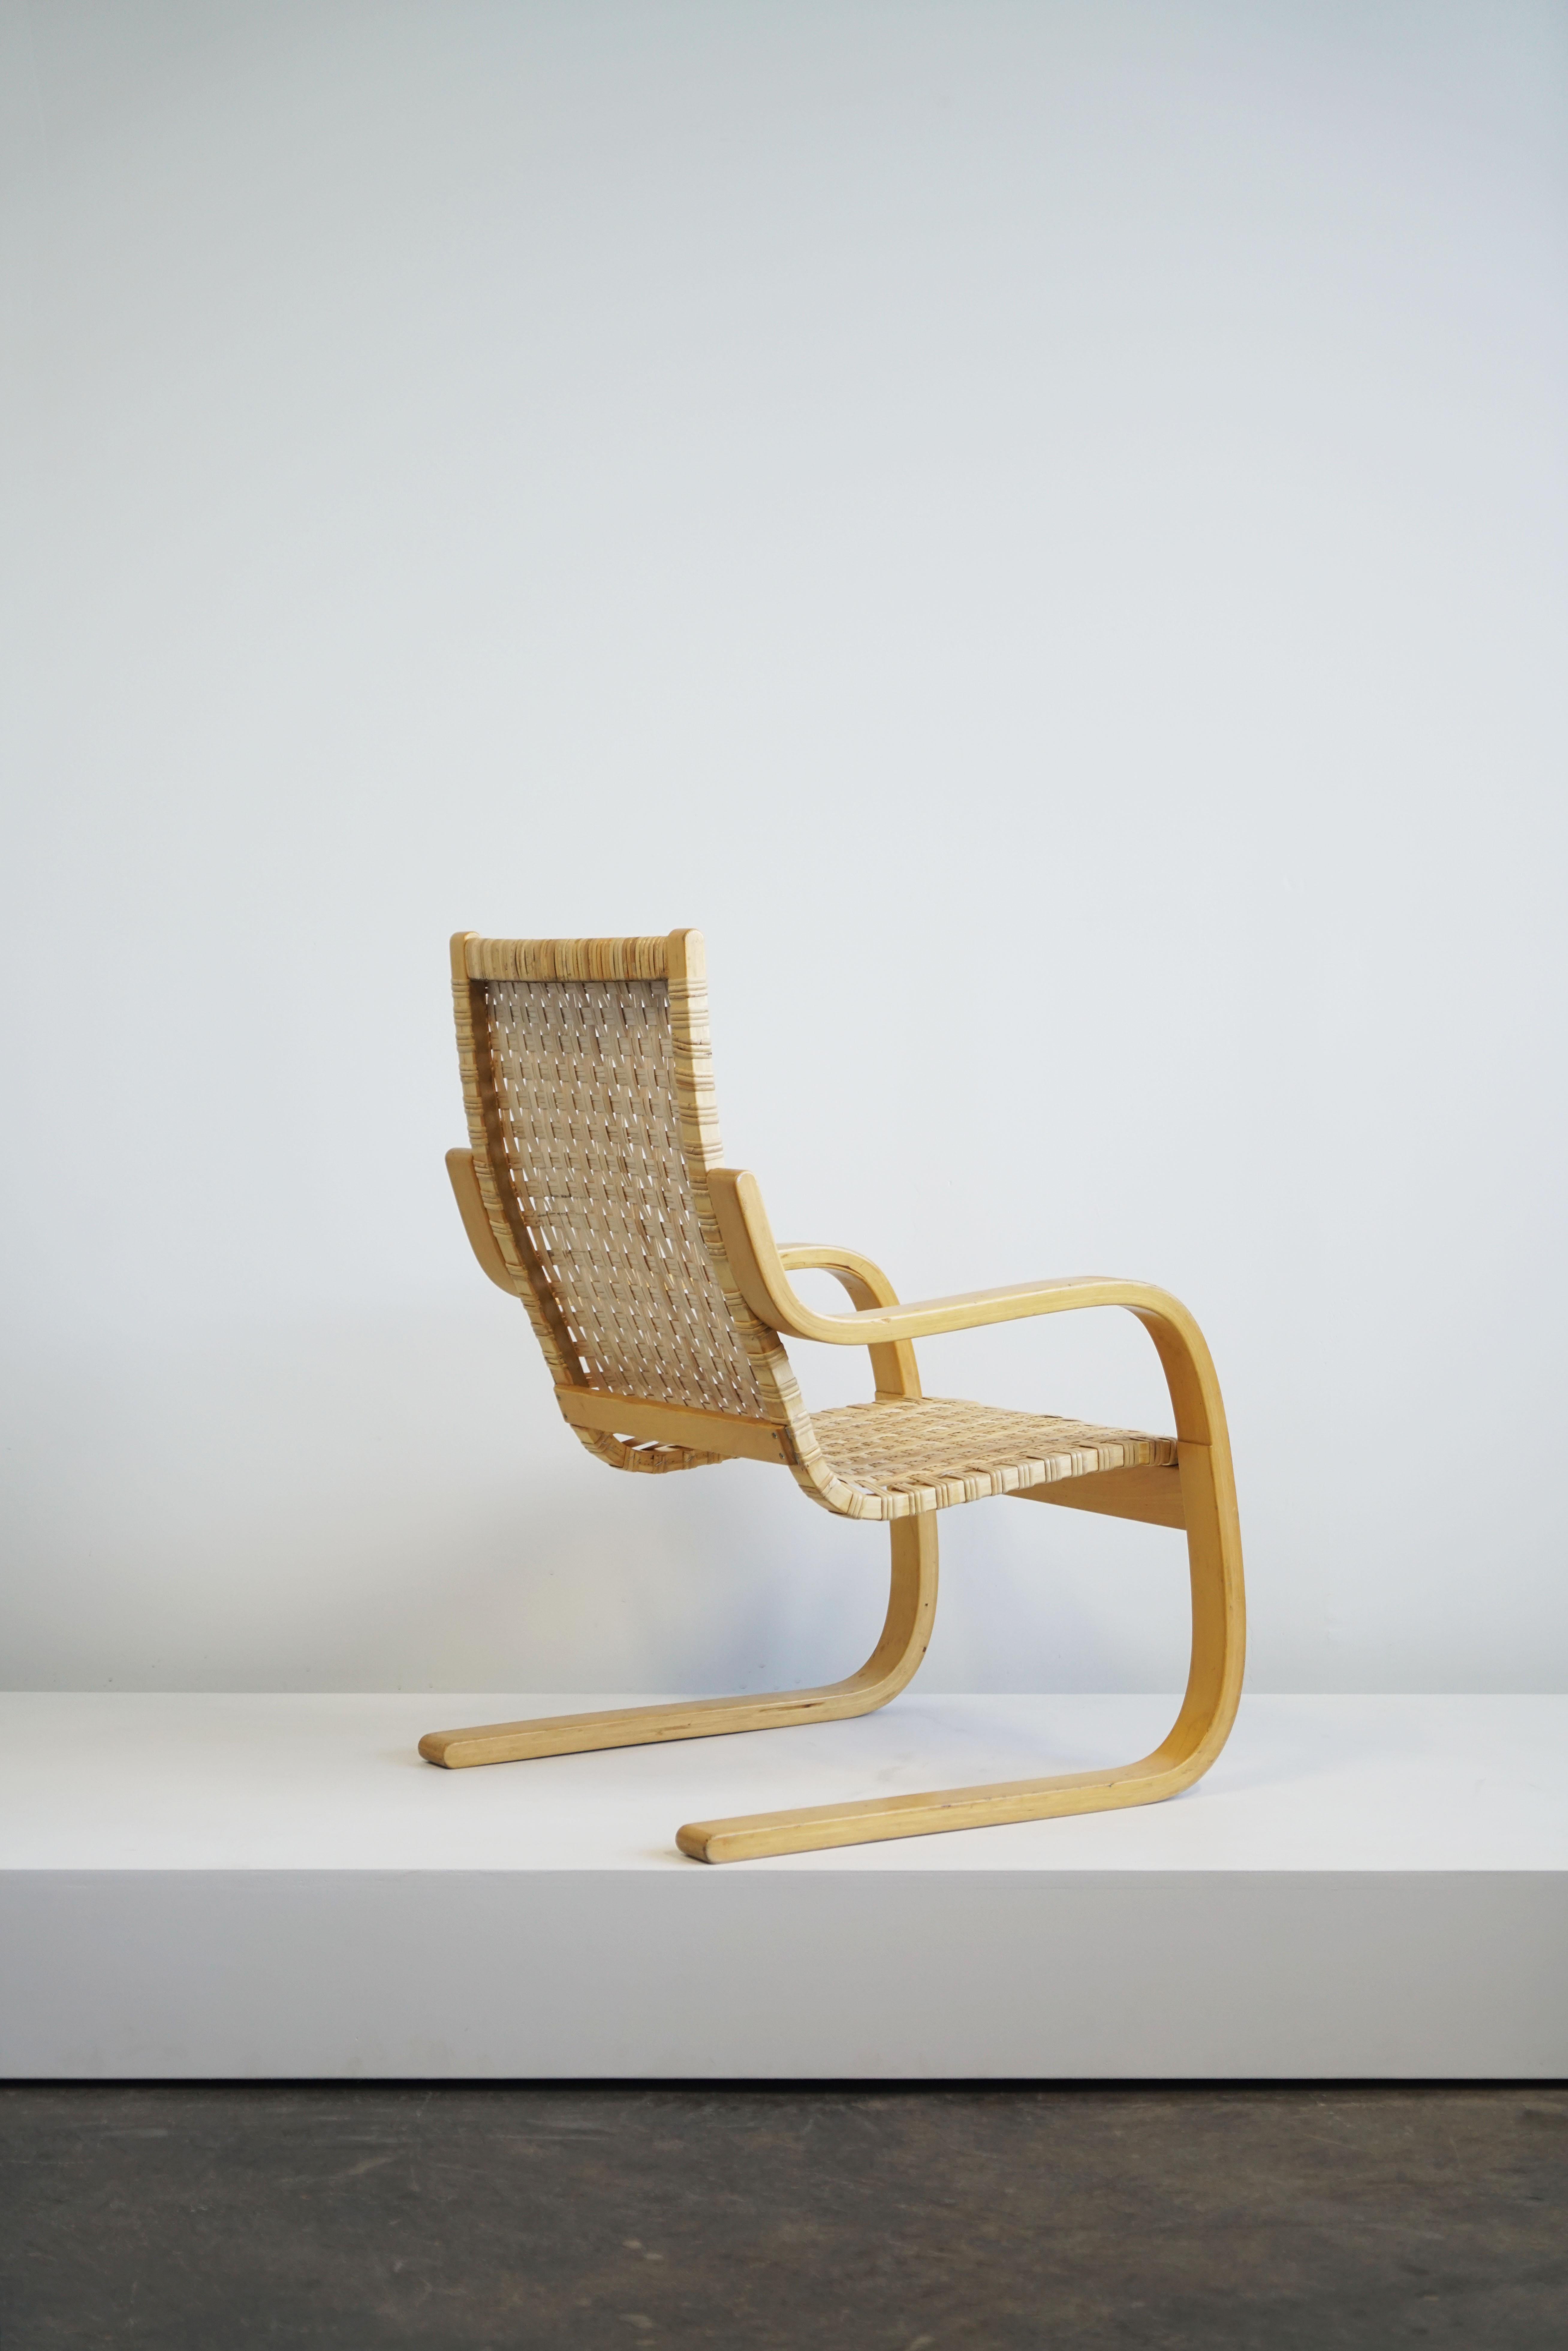 1960 Alvar Aalto Cantilever Chair Model 406 by Artek in Birch and Cane Webbing For Sale 3